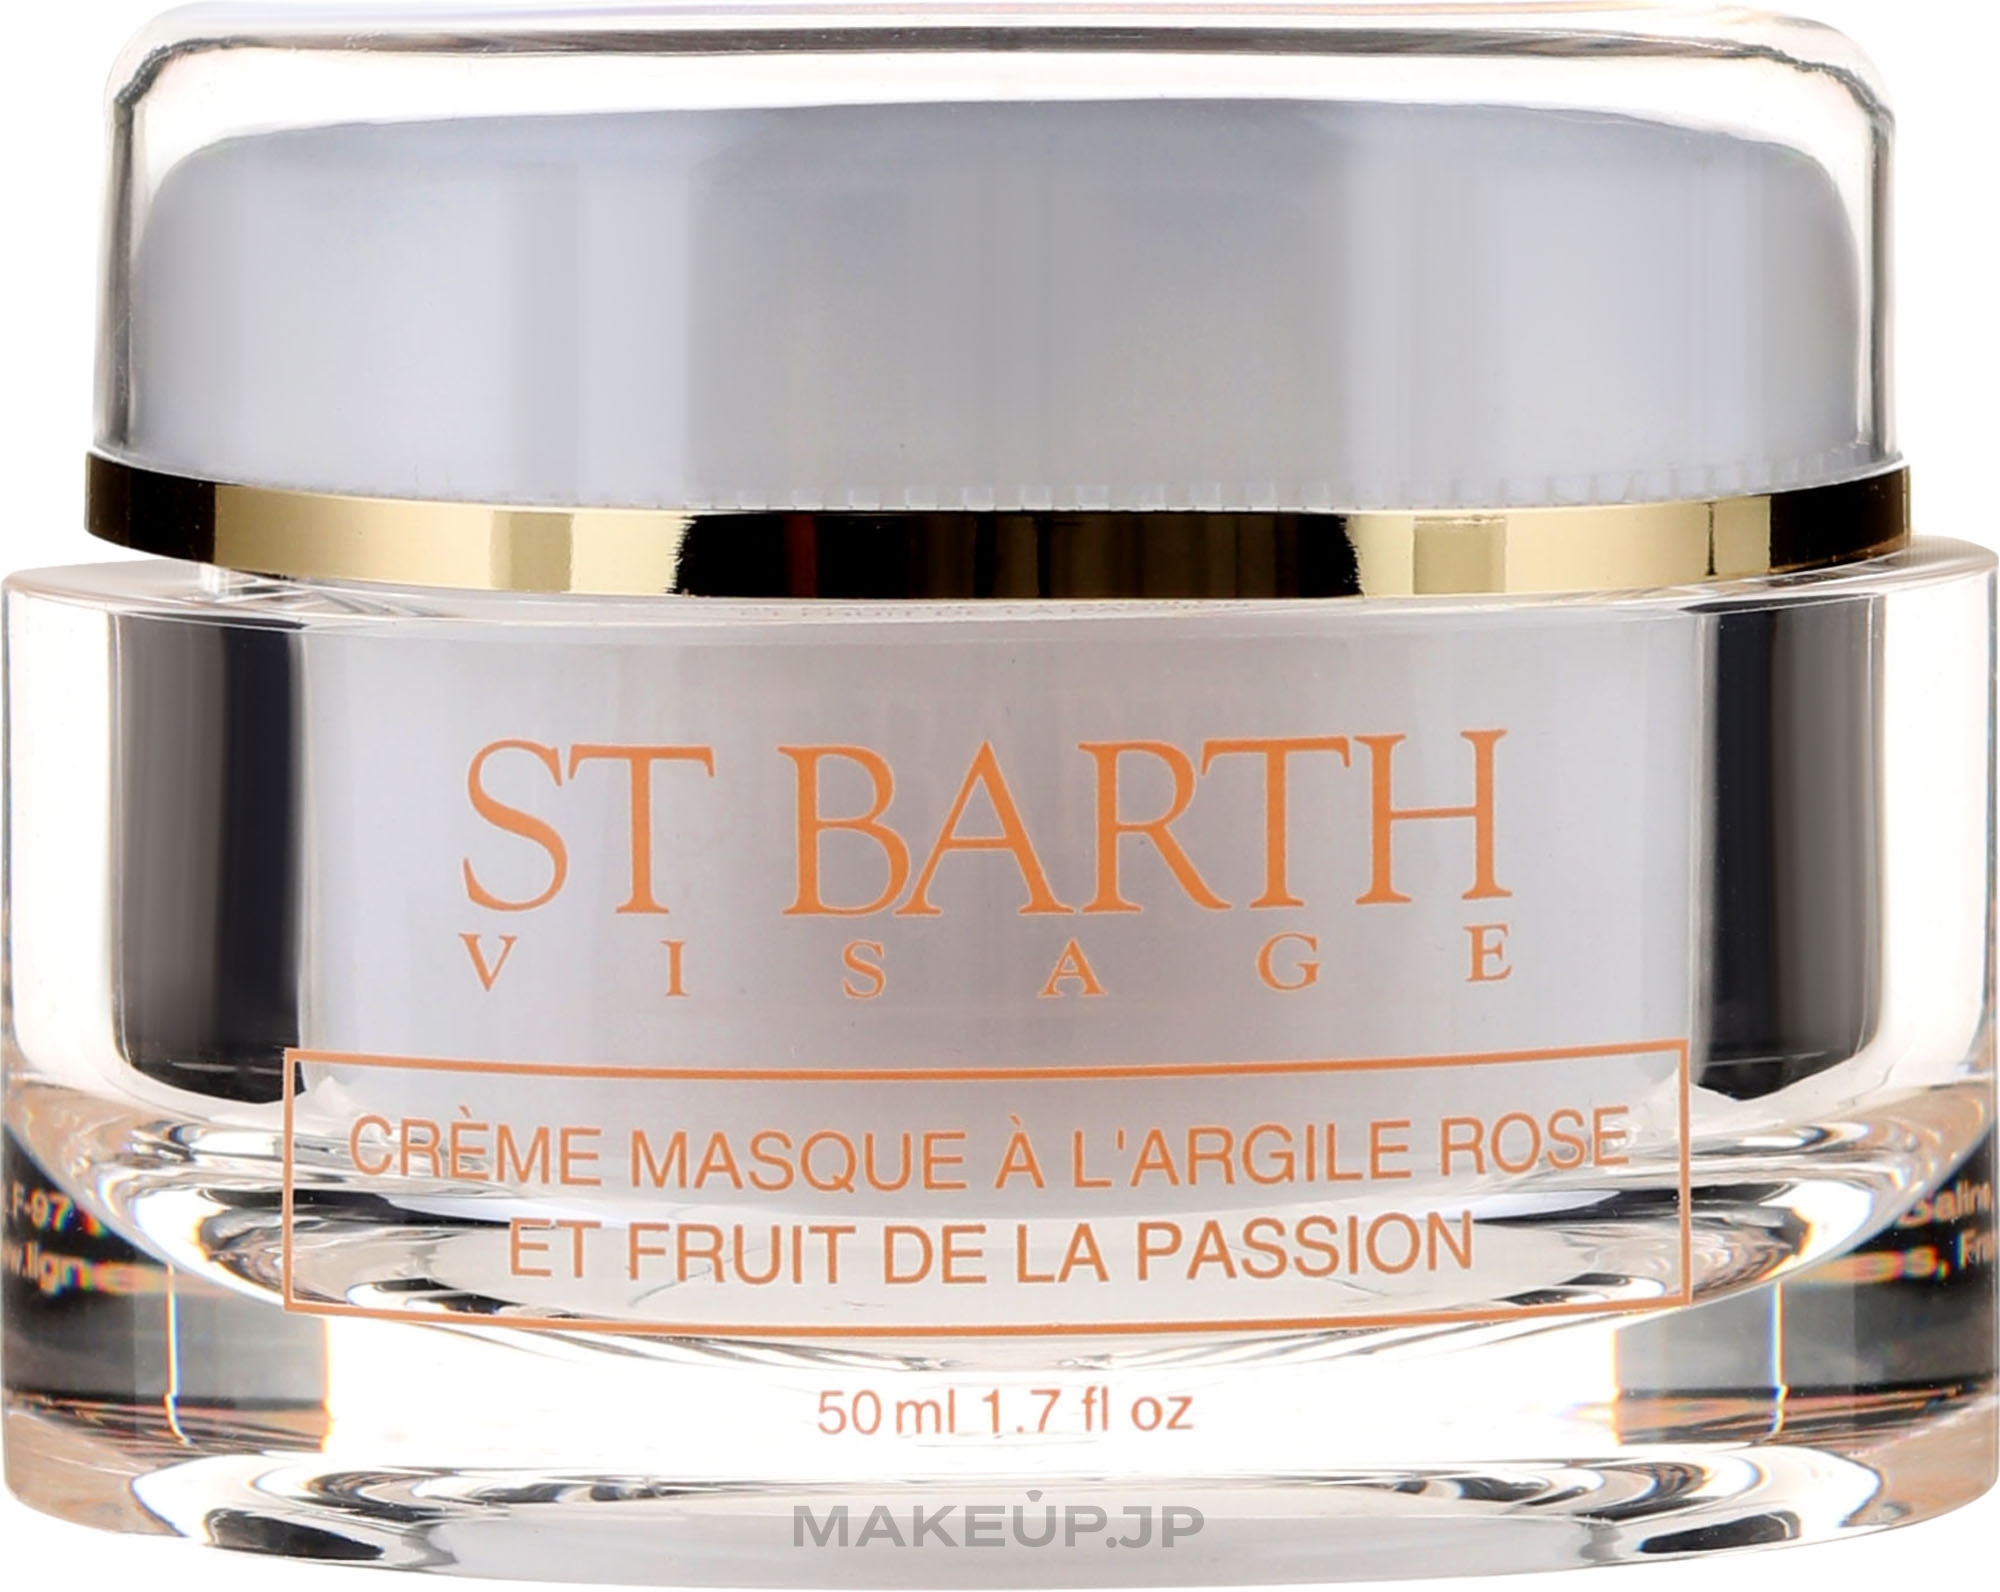 Pink Clay and Passion Fruit Facial Cream Mask - Ligne St Barth Cream Mask With Pink Clay And Passion Fruit — photo 50 ml